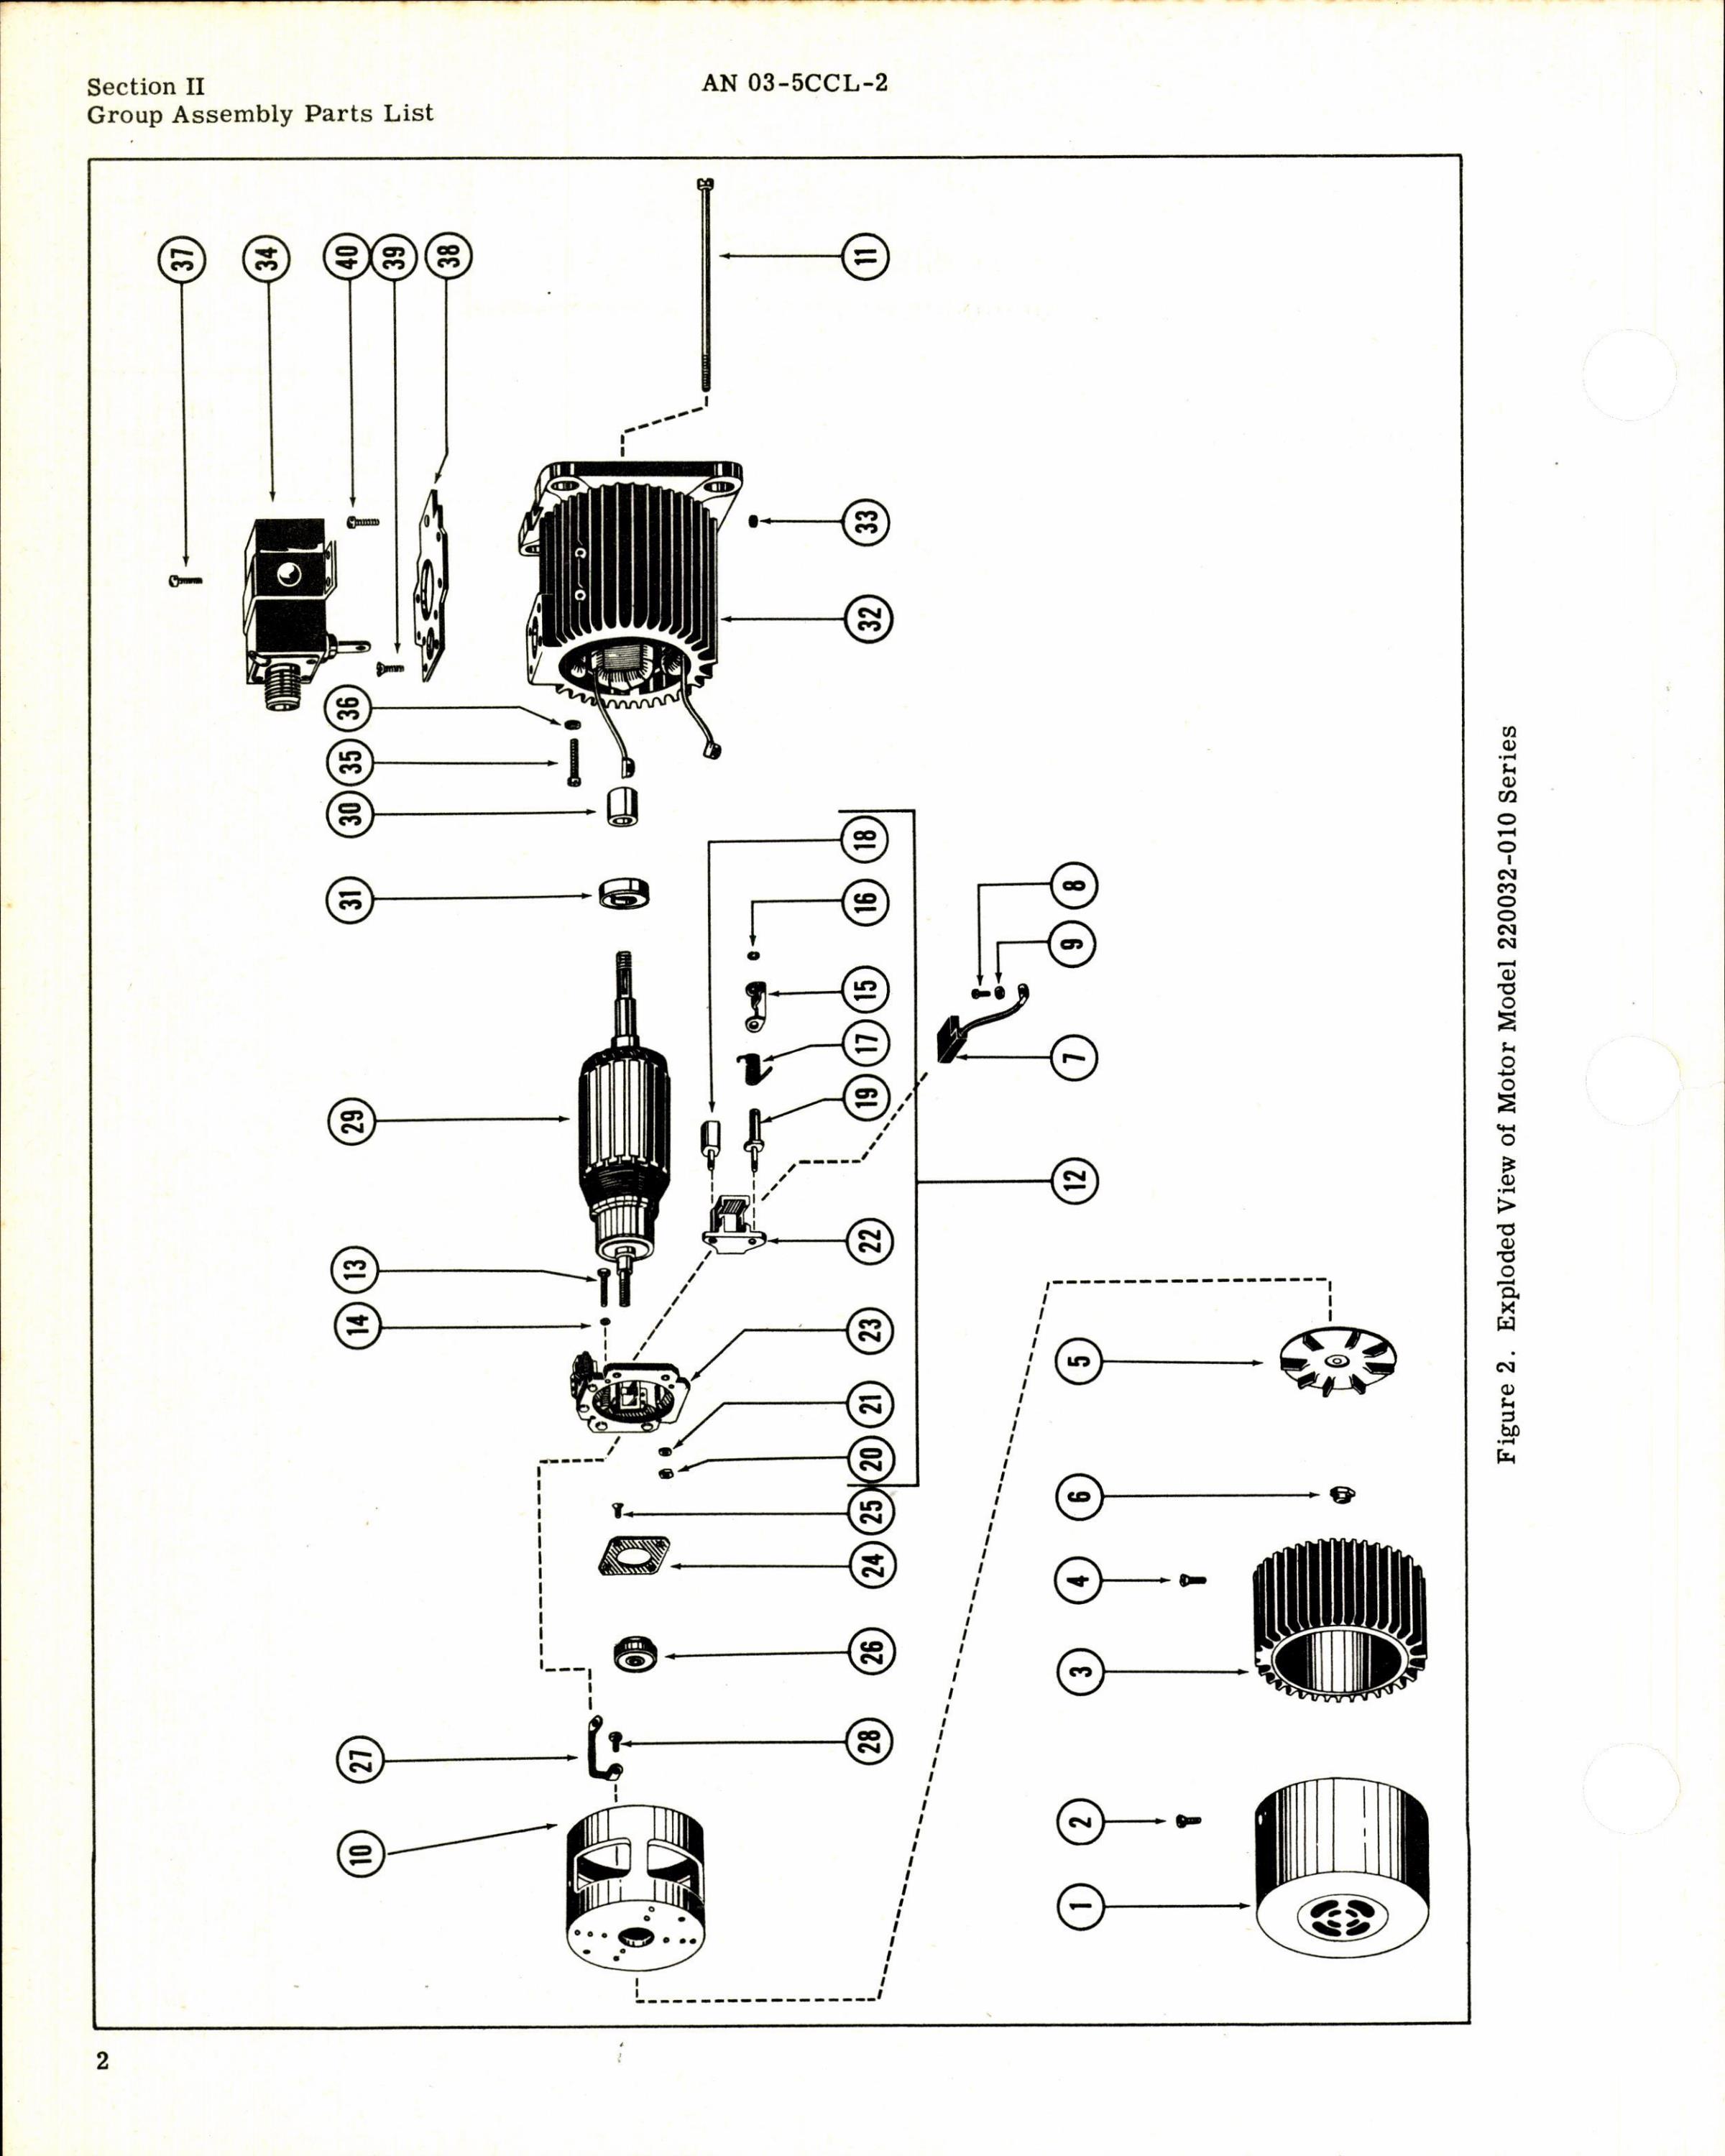 Sample page 4 from AirCorps Library document: Parts Catalog for Pesco Electric Motors, Model 220032 Series